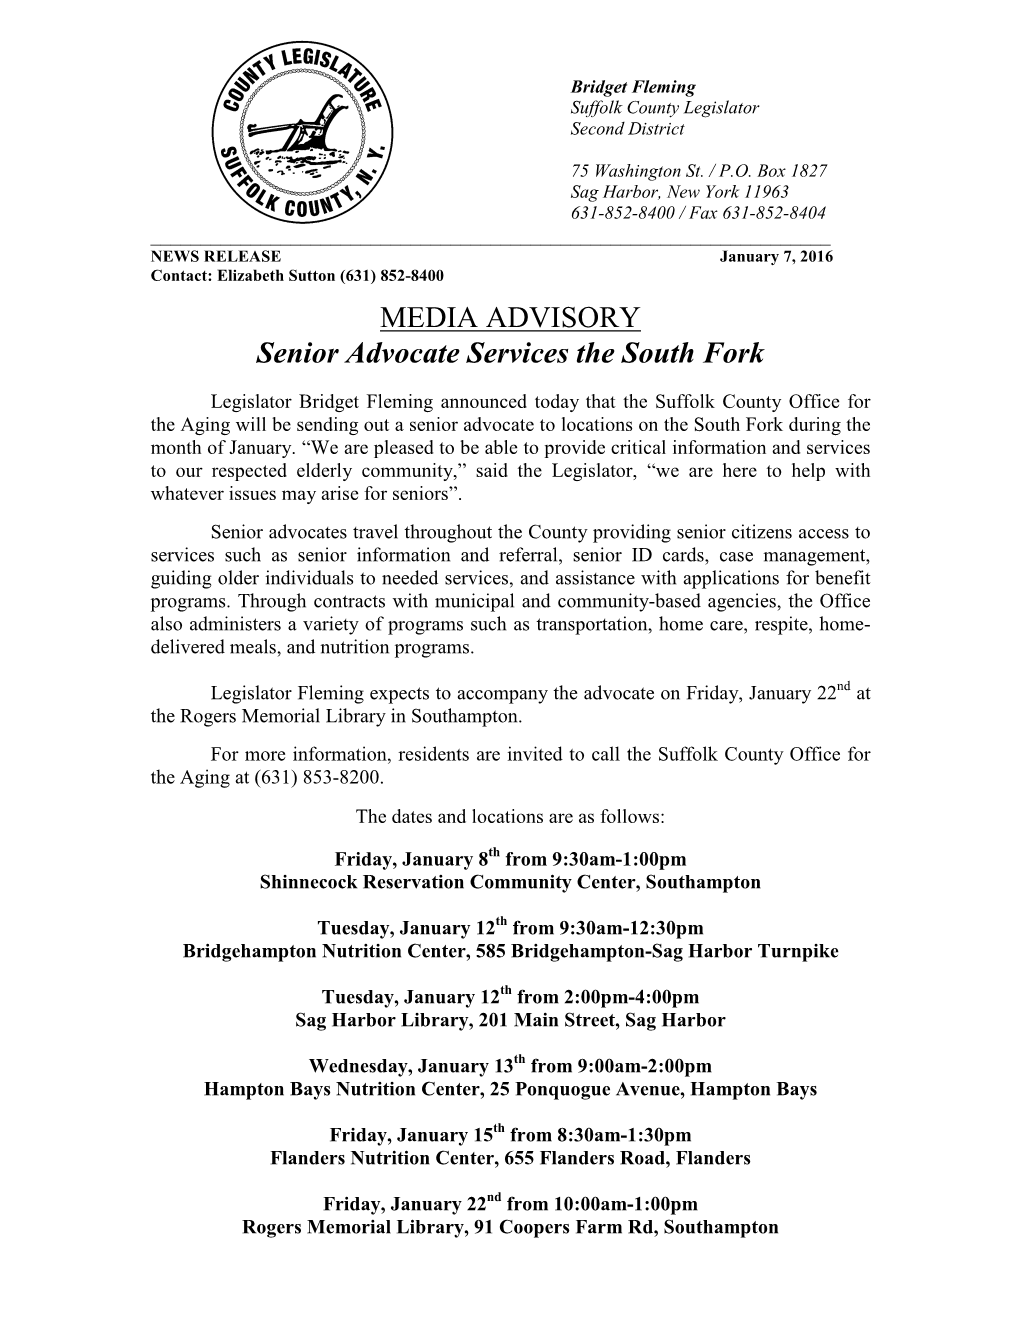 Senior Advocate Services the South Fork